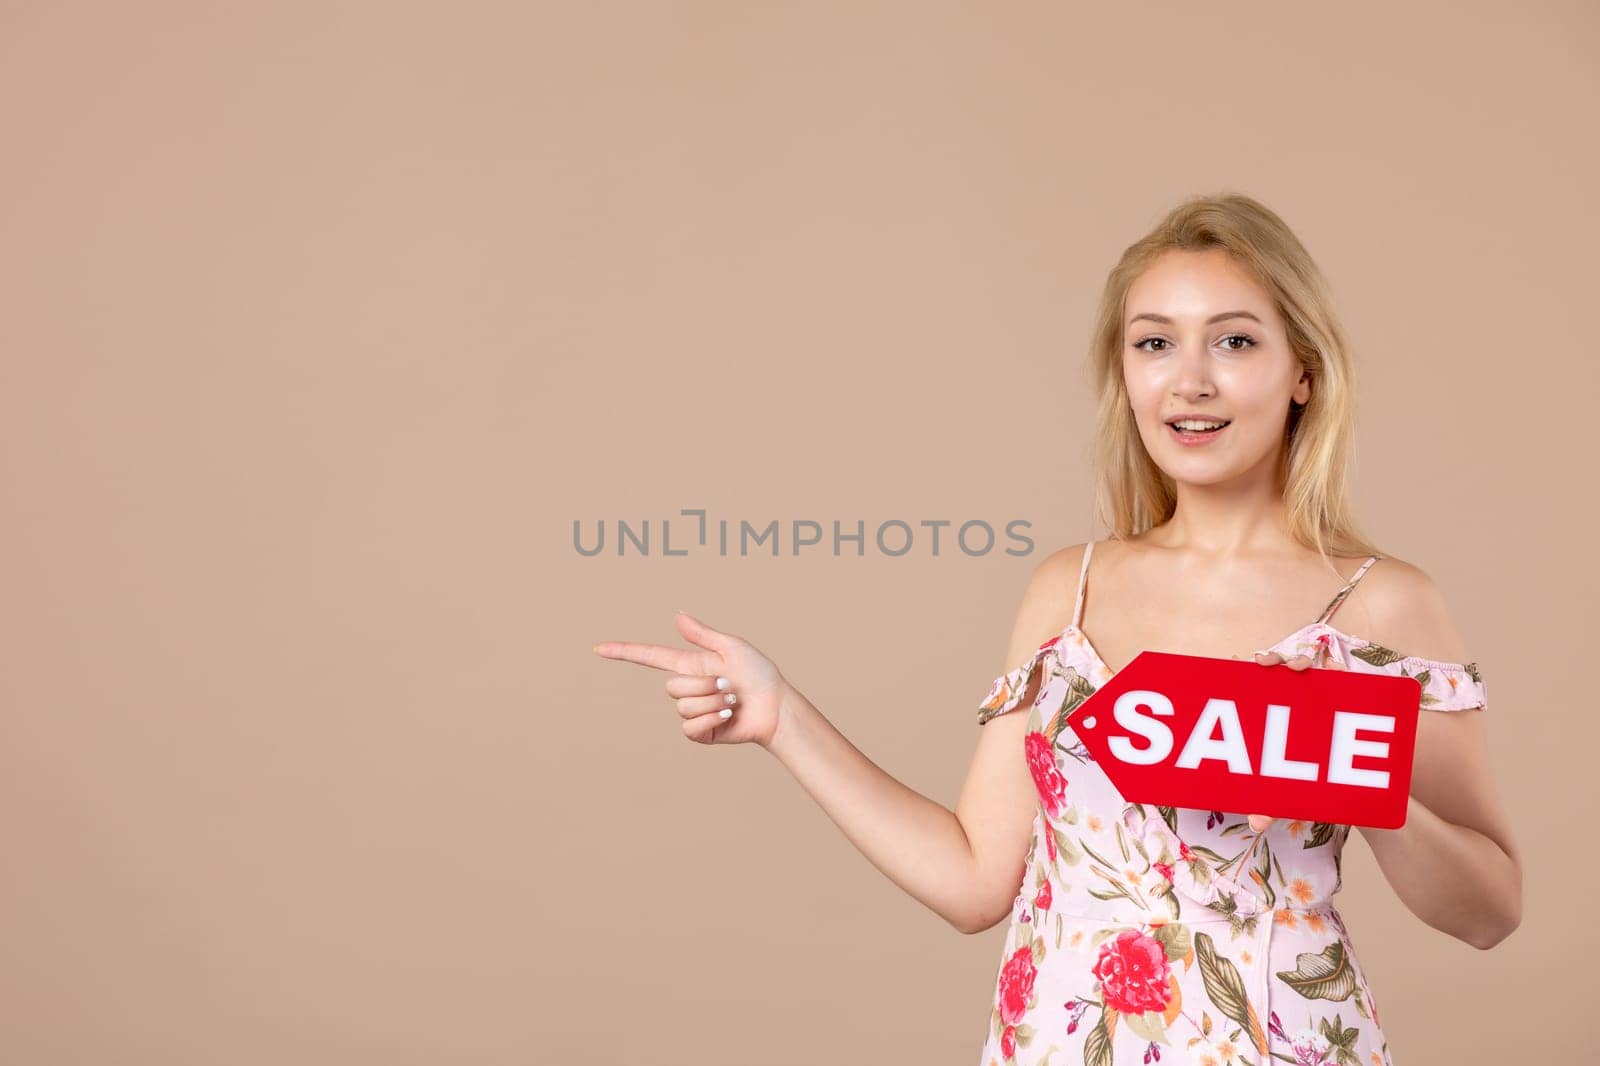 front view young female holding red sale nameplate on brown background money march sensual shopping woman equality feminine